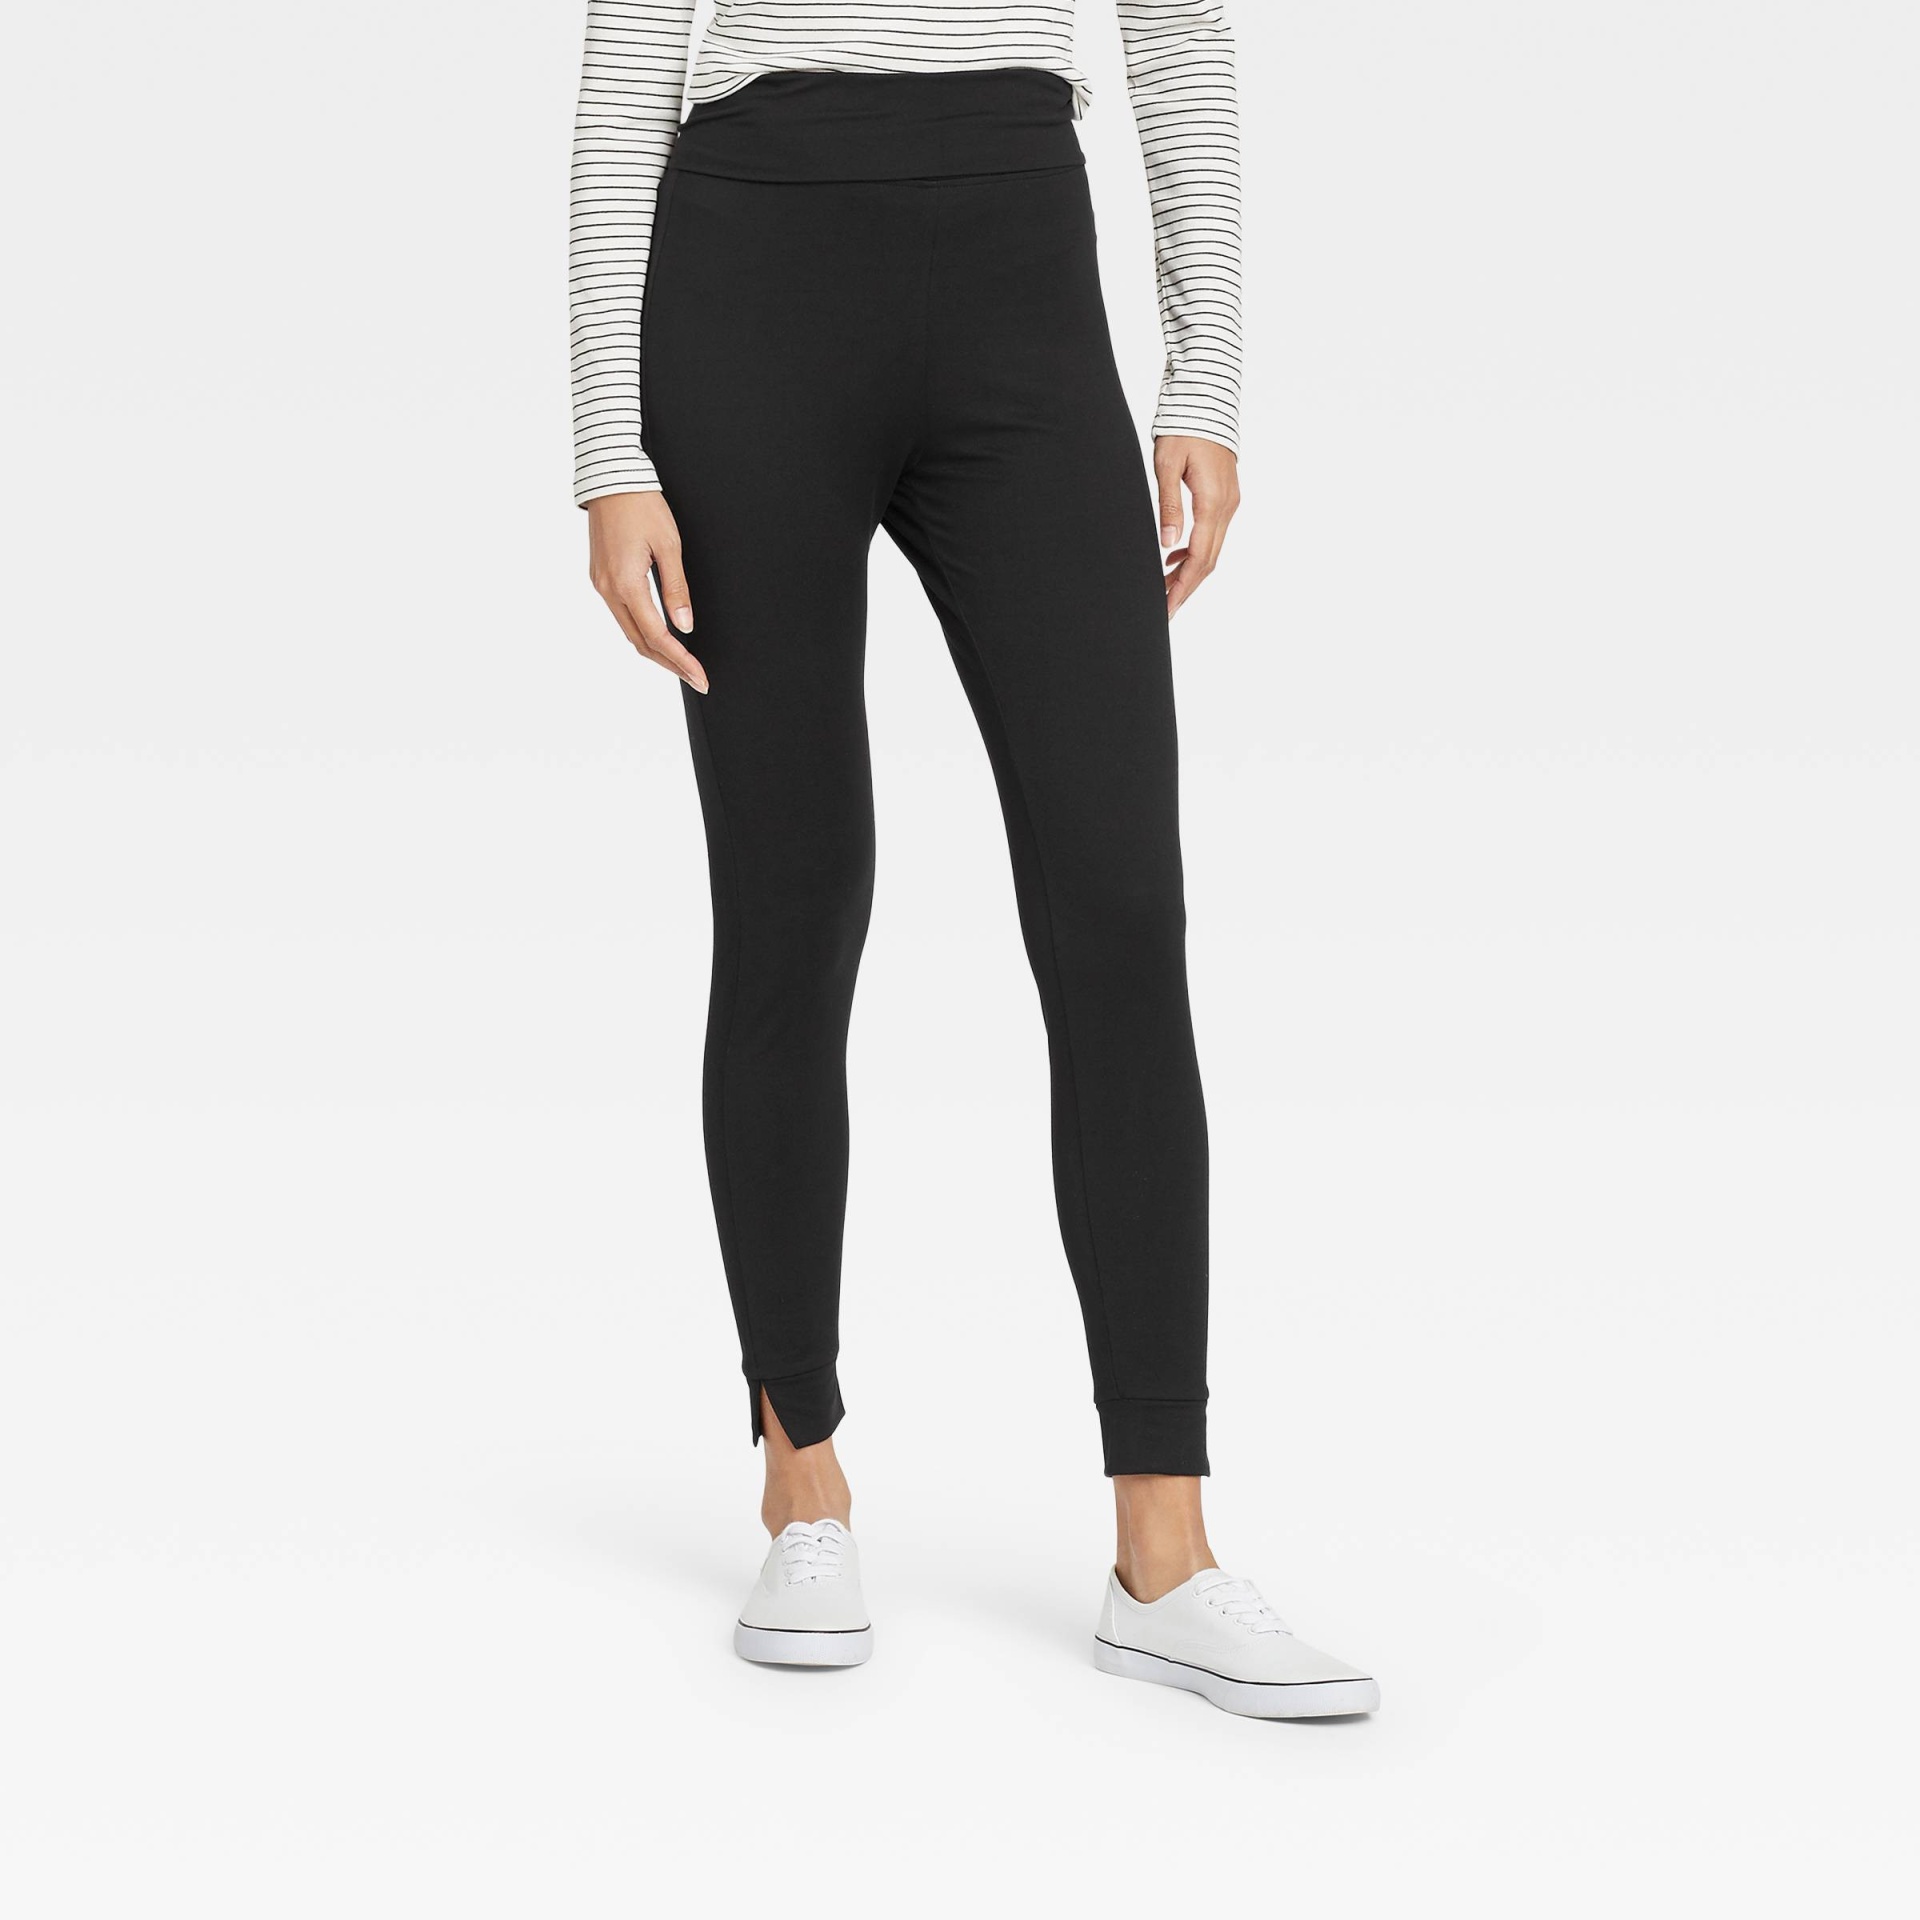 slide 1 of 3, Women's Brushed Leggings with Foldover Waistband and Split Hem Cuffs - A New Day Black XL, 1 ct